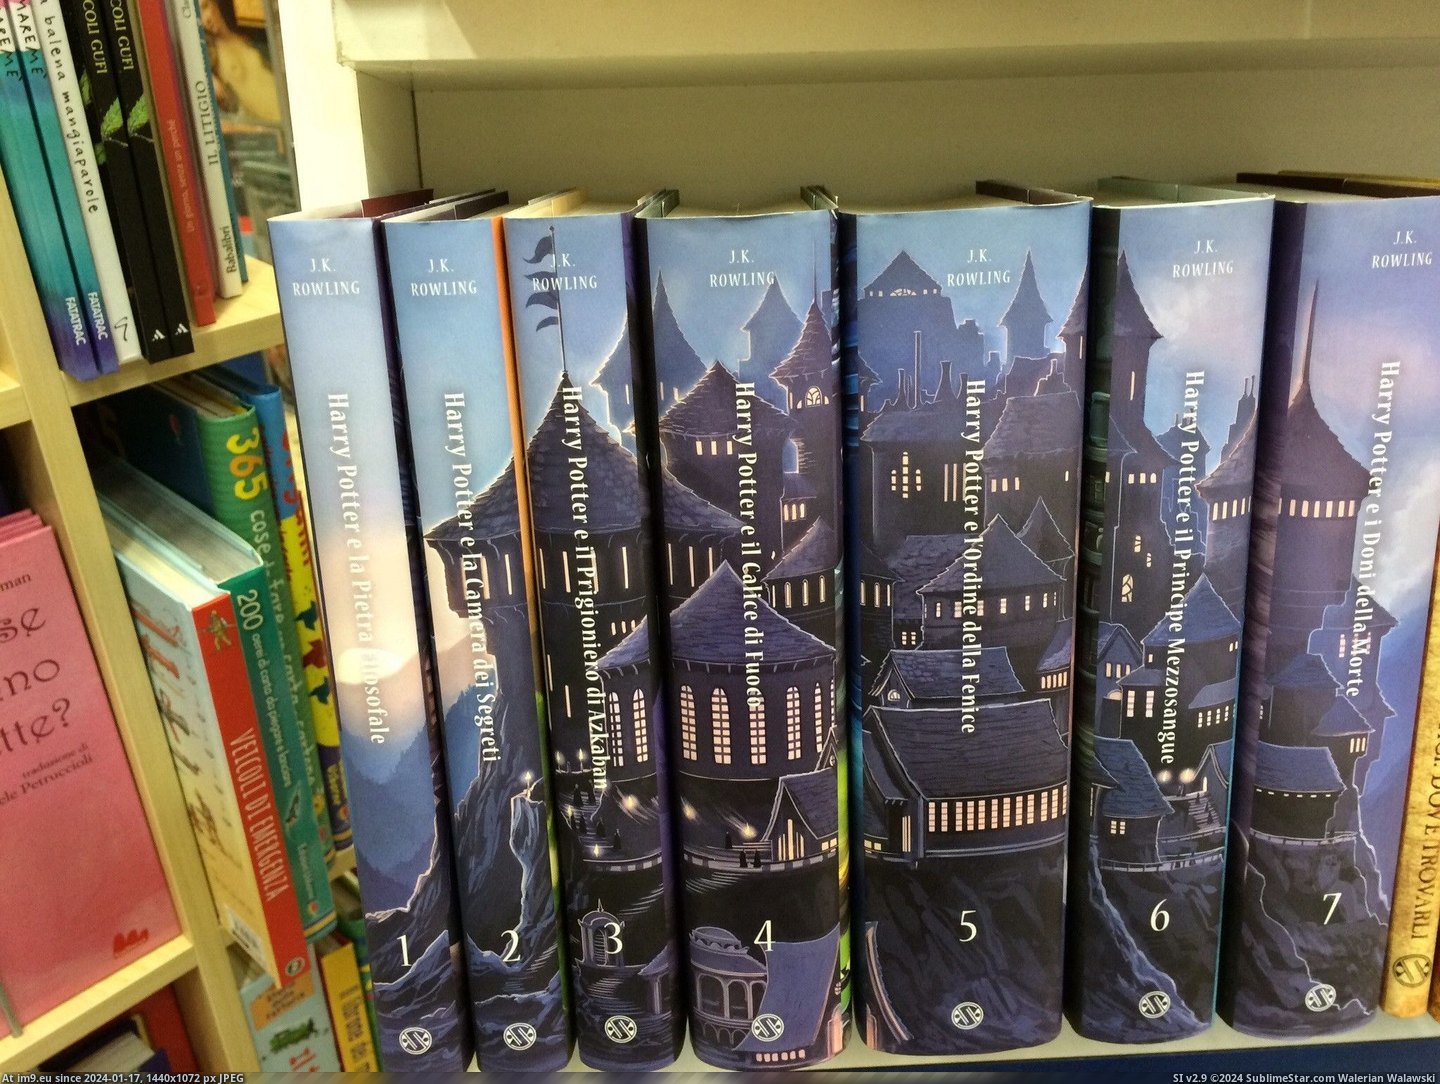 #Series #Edition #Italian #Books #Aligned #Forms #Castle #Harry #Potter [Mildlyinteresting] This Italian edition of the Harry Potter series forms a castle when the books are aligned Pic. (Изображение из альбом My r/MILDLYINTERESTING favs))